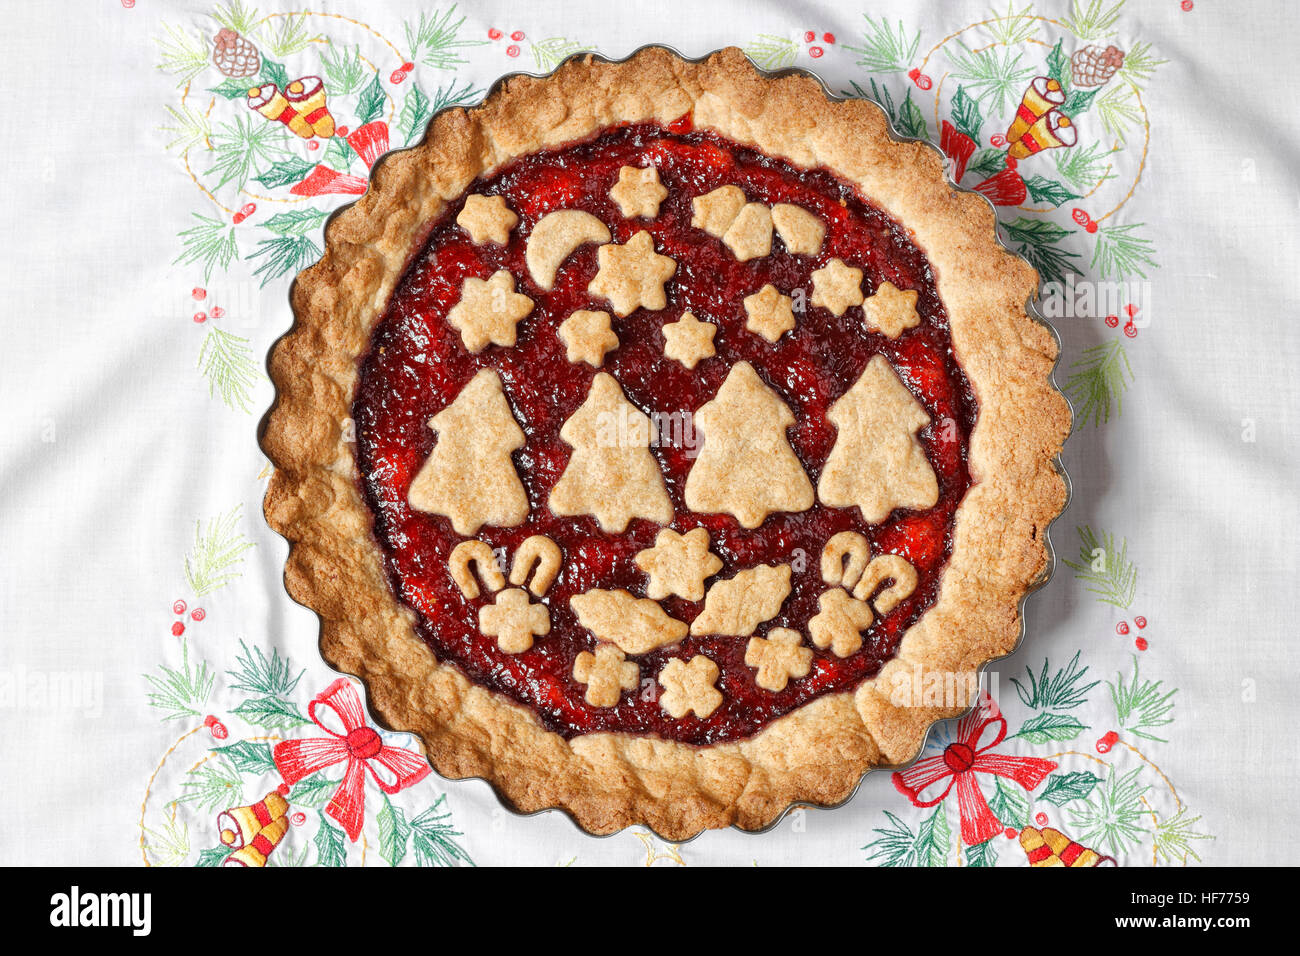 Decorated Linzer torte for Christmas Stock Photo